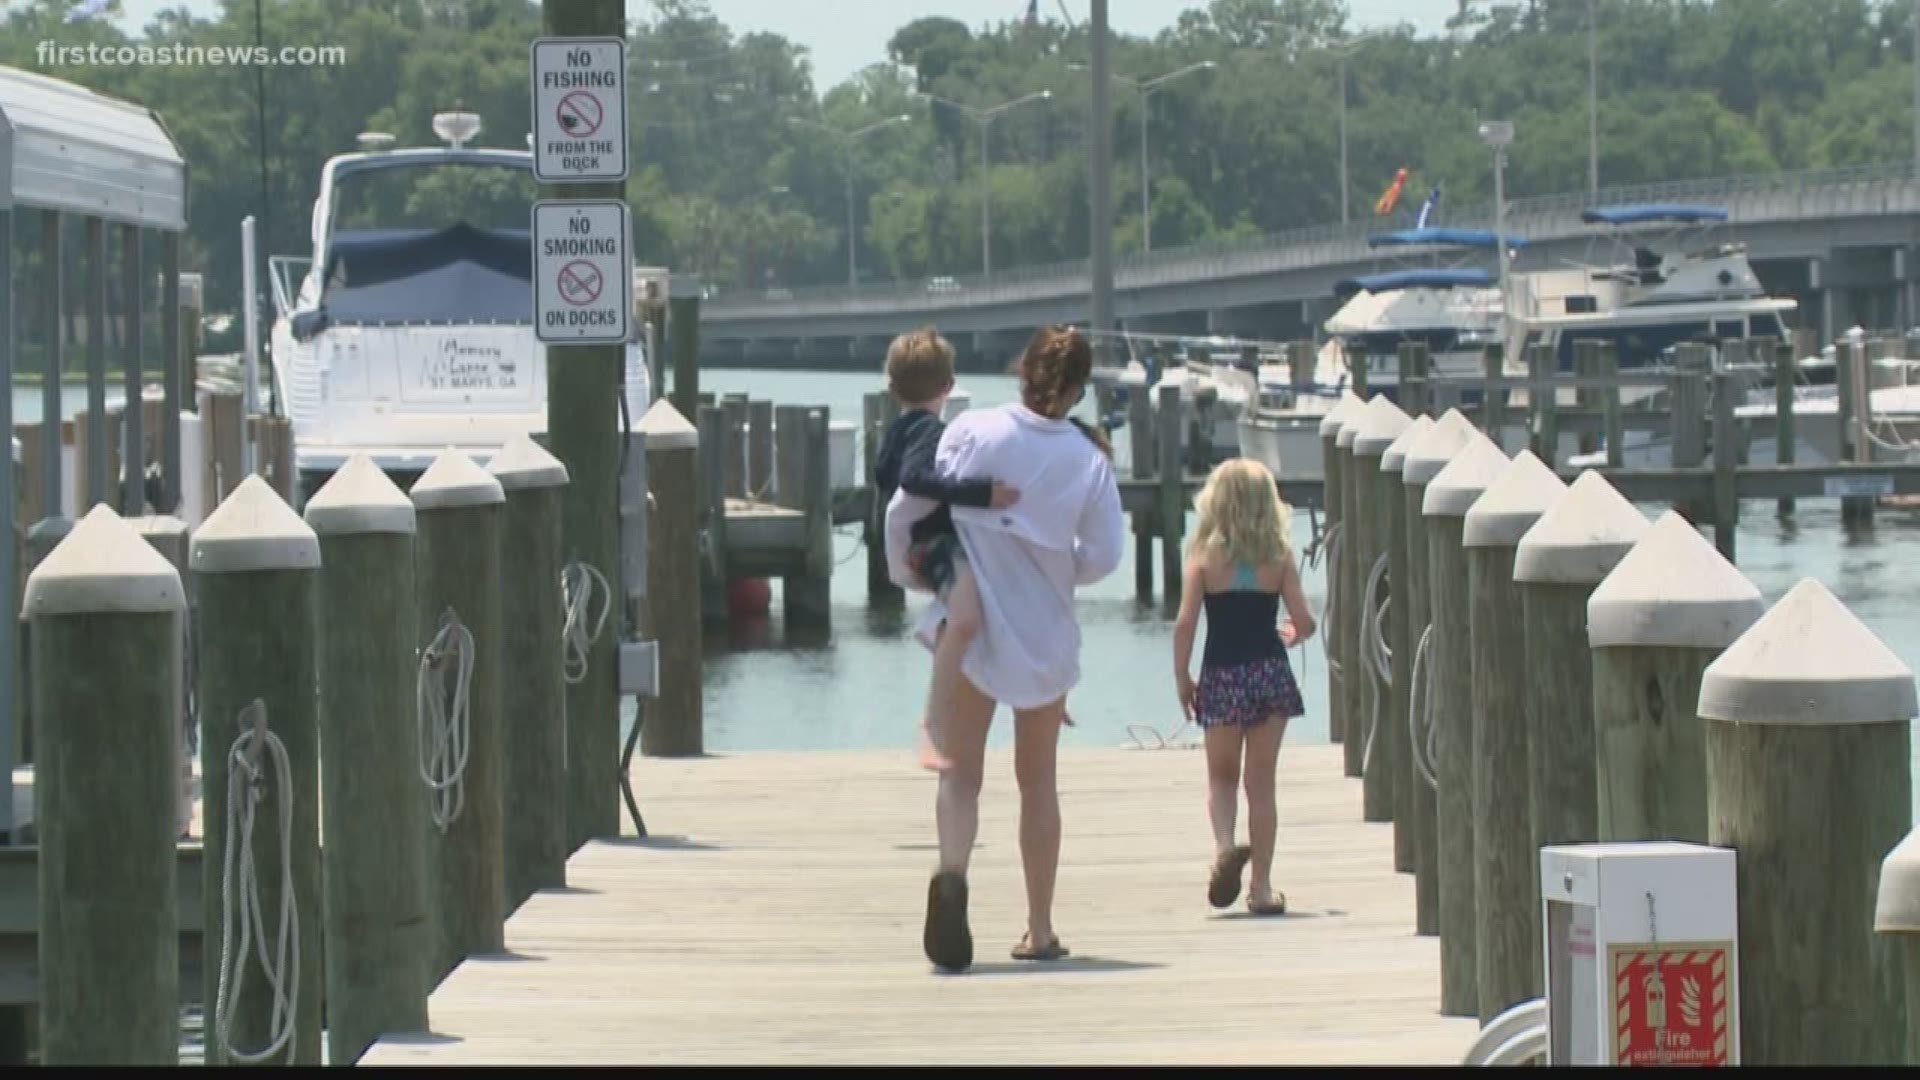 Freedom Boat club says they've had more than 400 reservations this Memorial Day Weekend. One Charter Captain down in St. Augustine recently gave a presentation on how being civil can benefit all boaters.